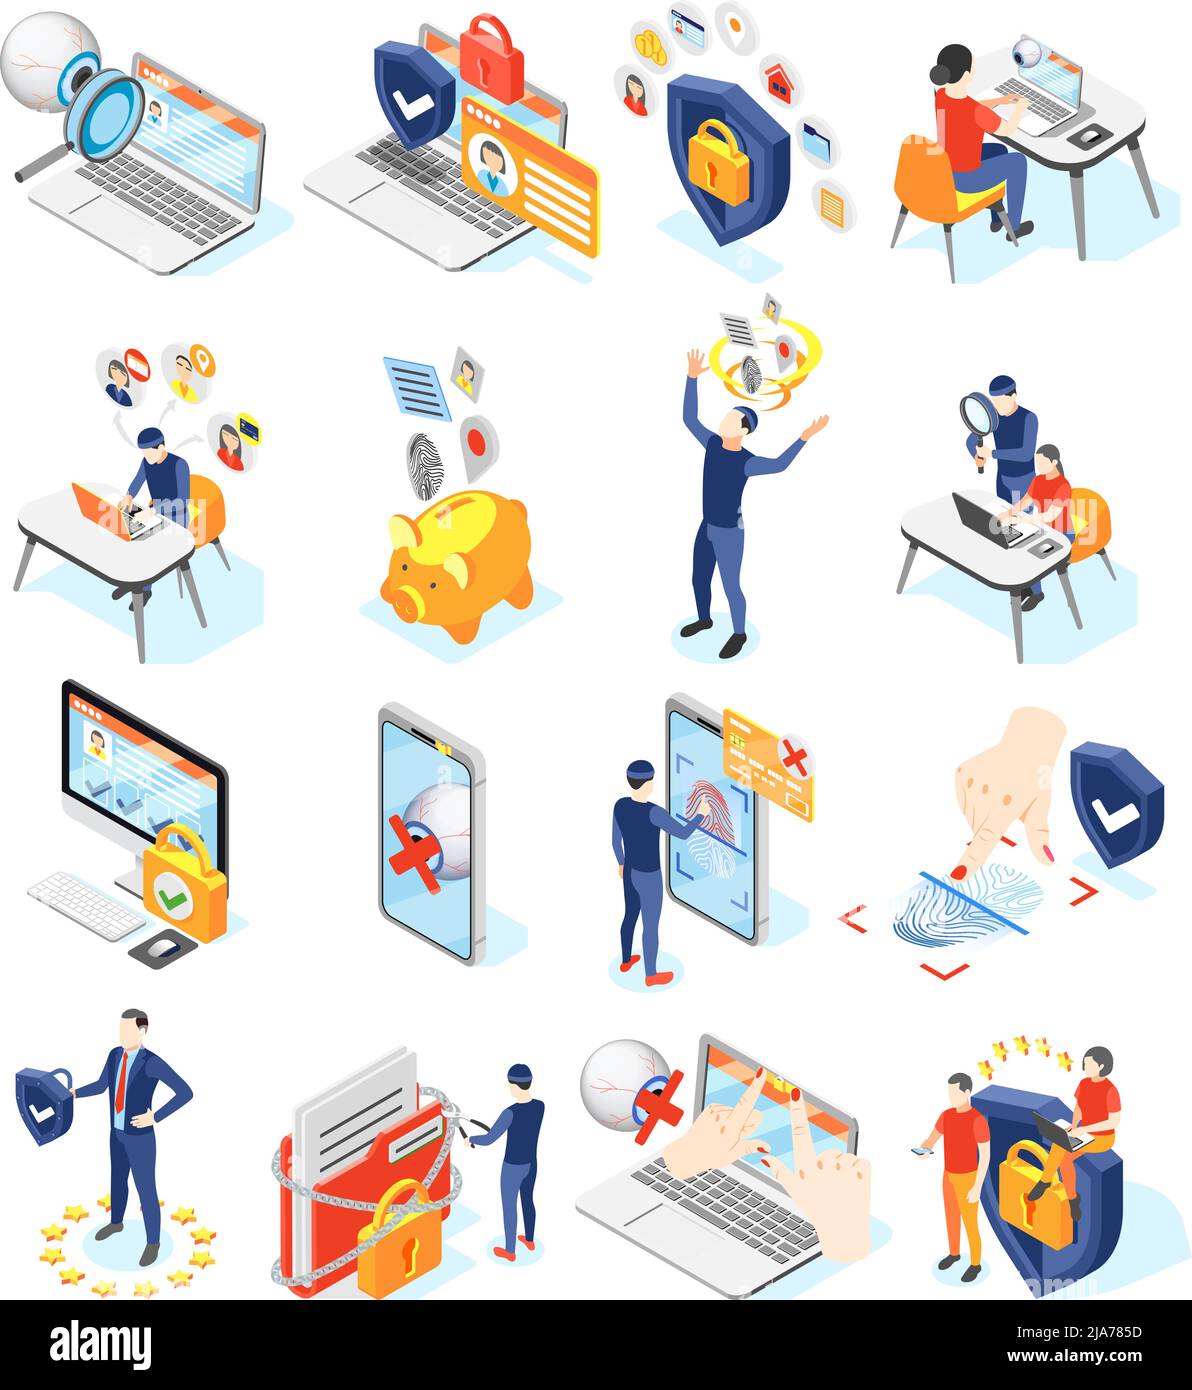 Personal data protection gdpr isometric recolor set of isolated icons and pictograms with gadgets and people vector illustration Stock Vector